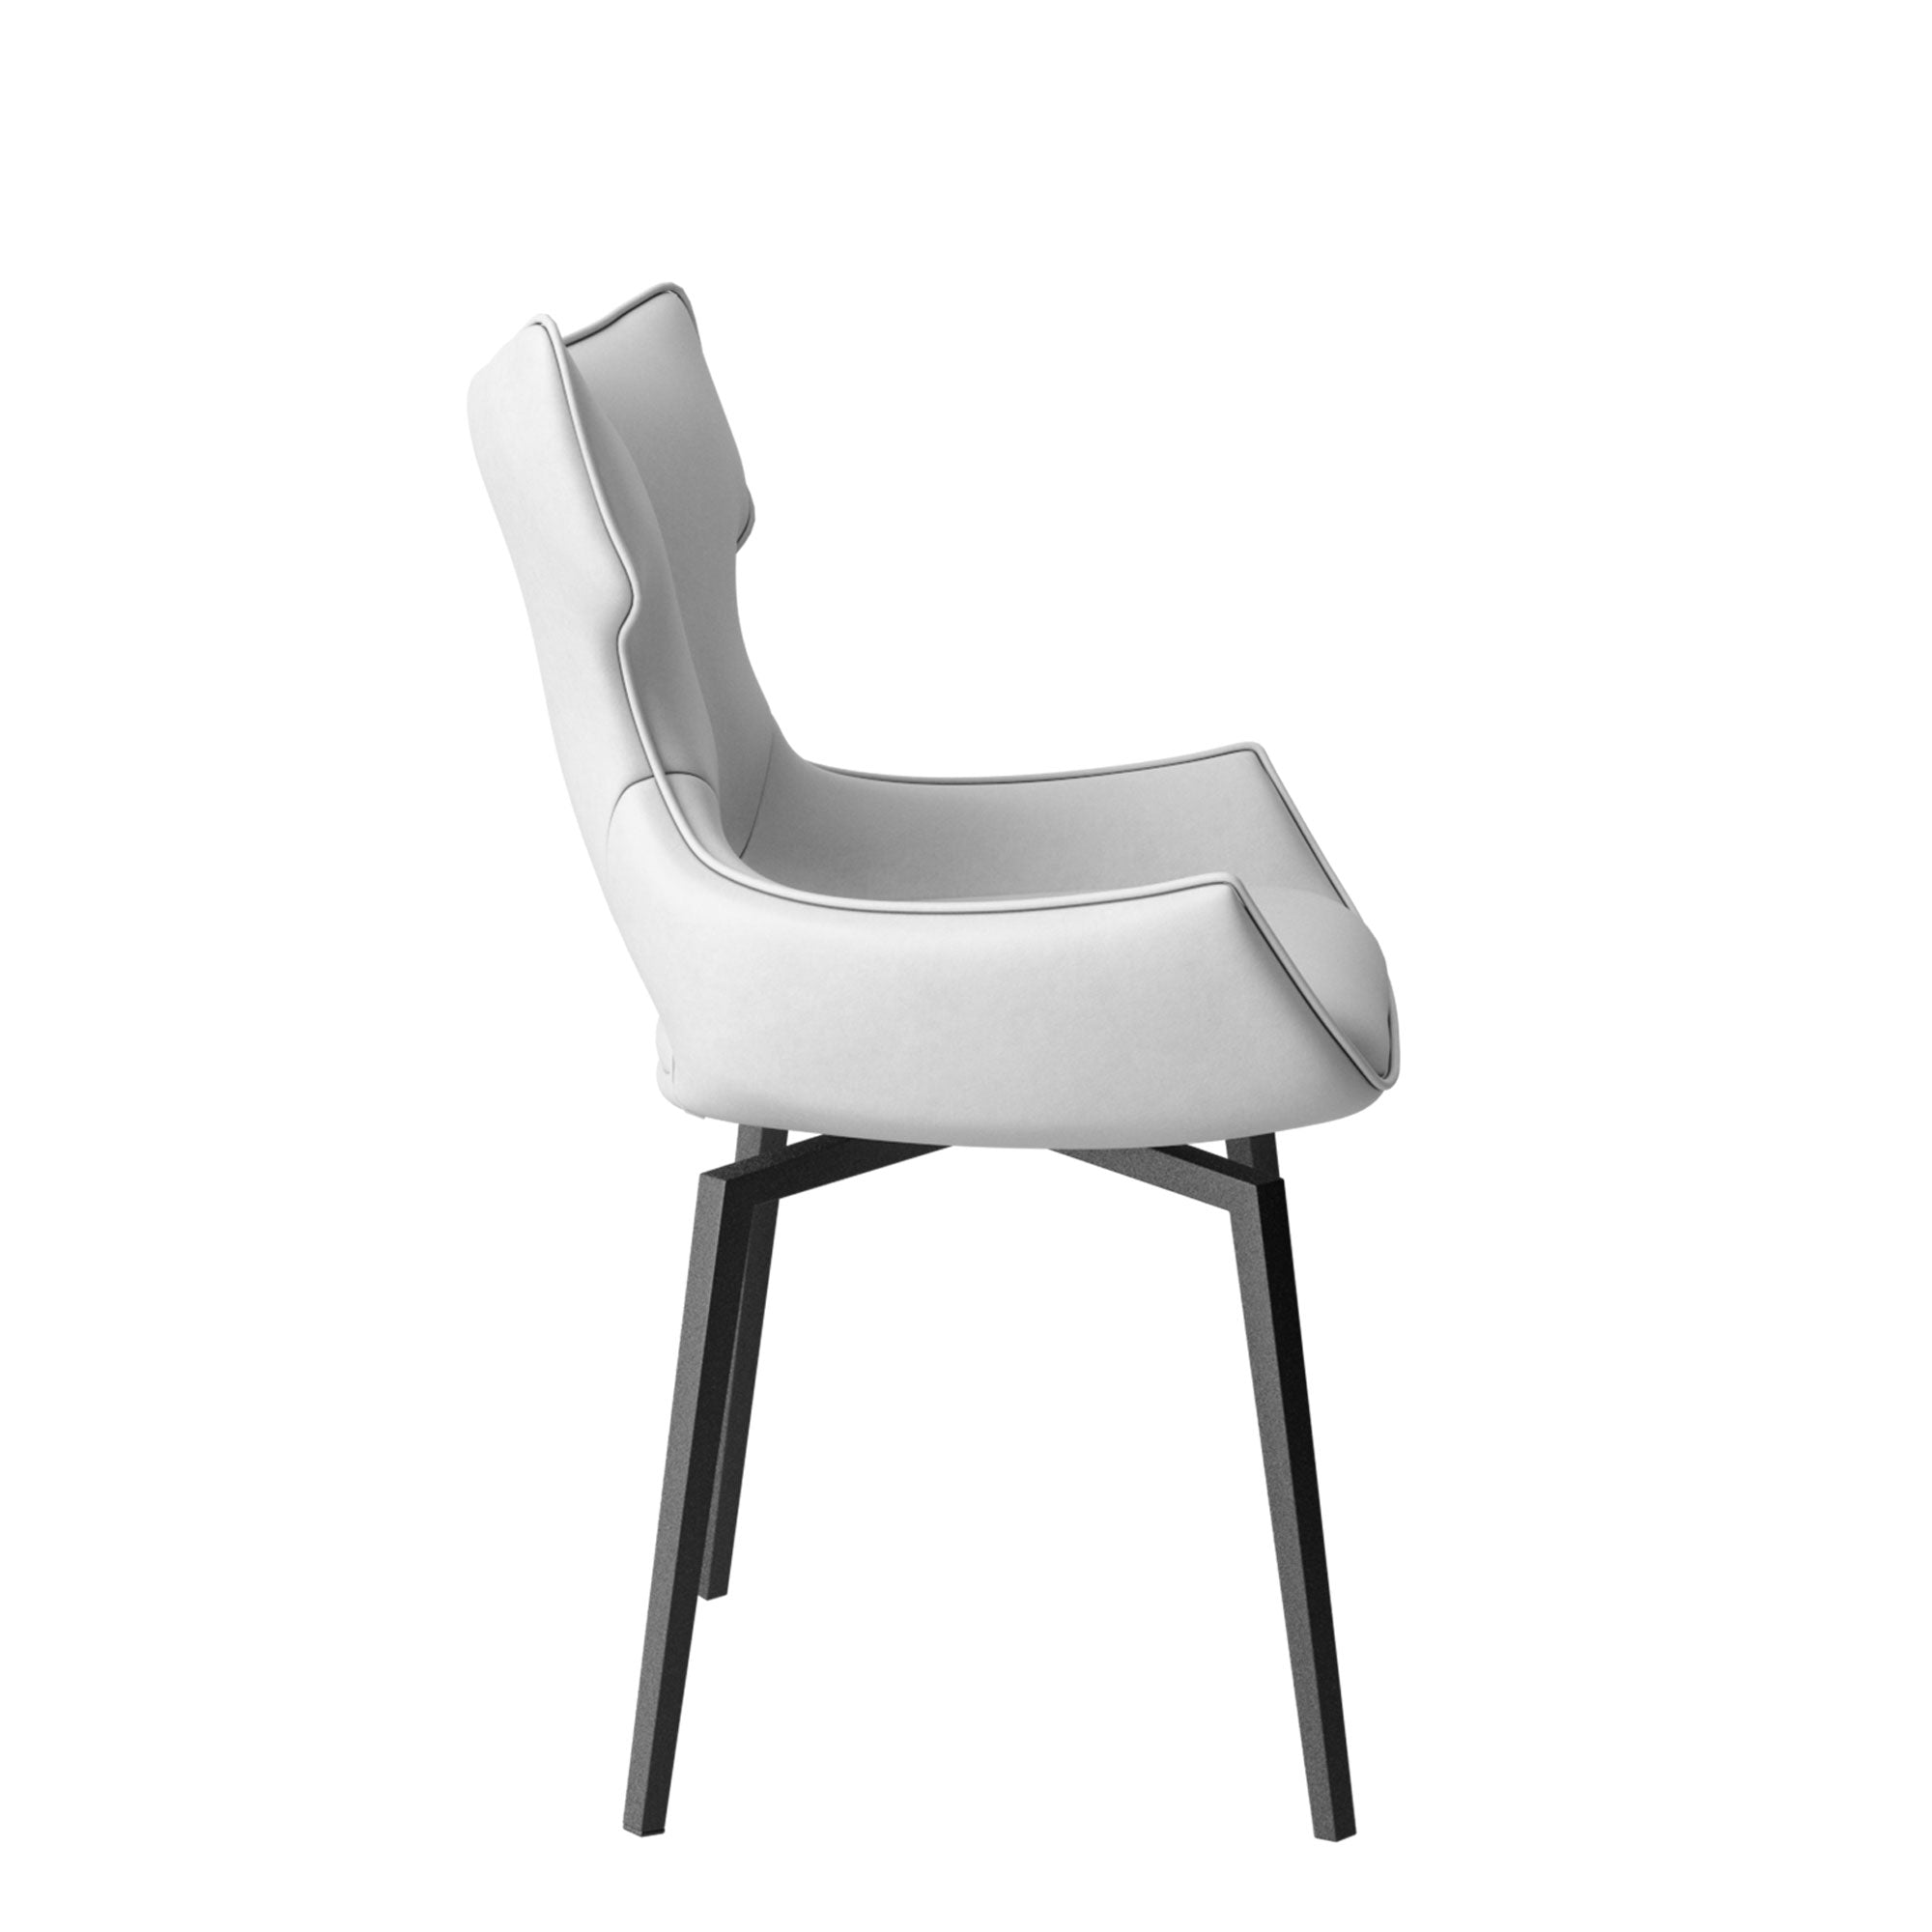 Luca - Swivel Dining Chair In White PU